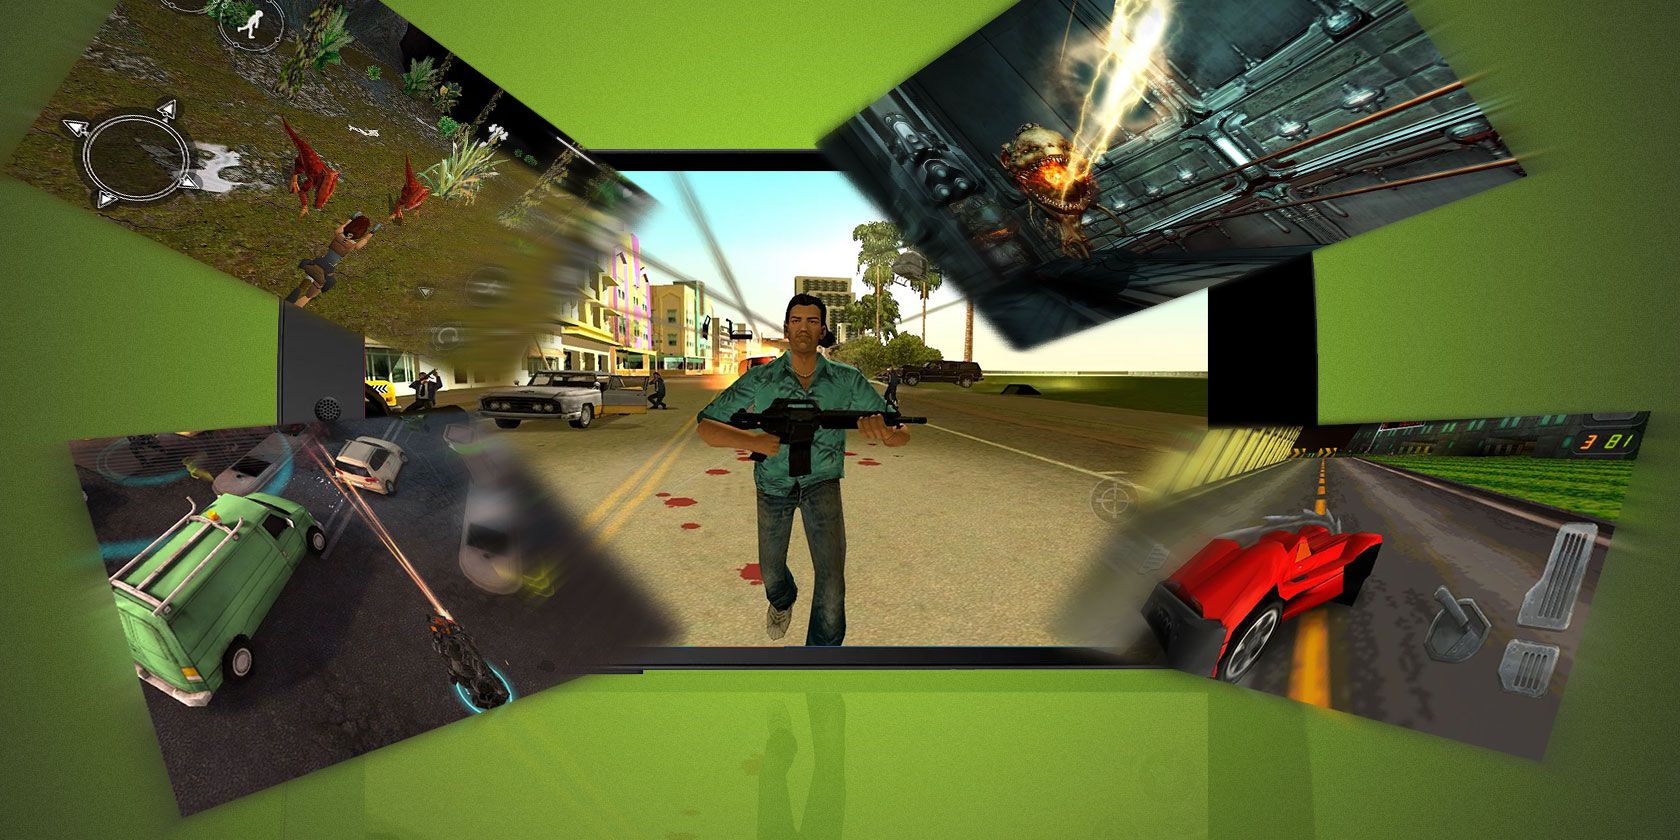 21 Classic PC Games to Play on Your Android Device